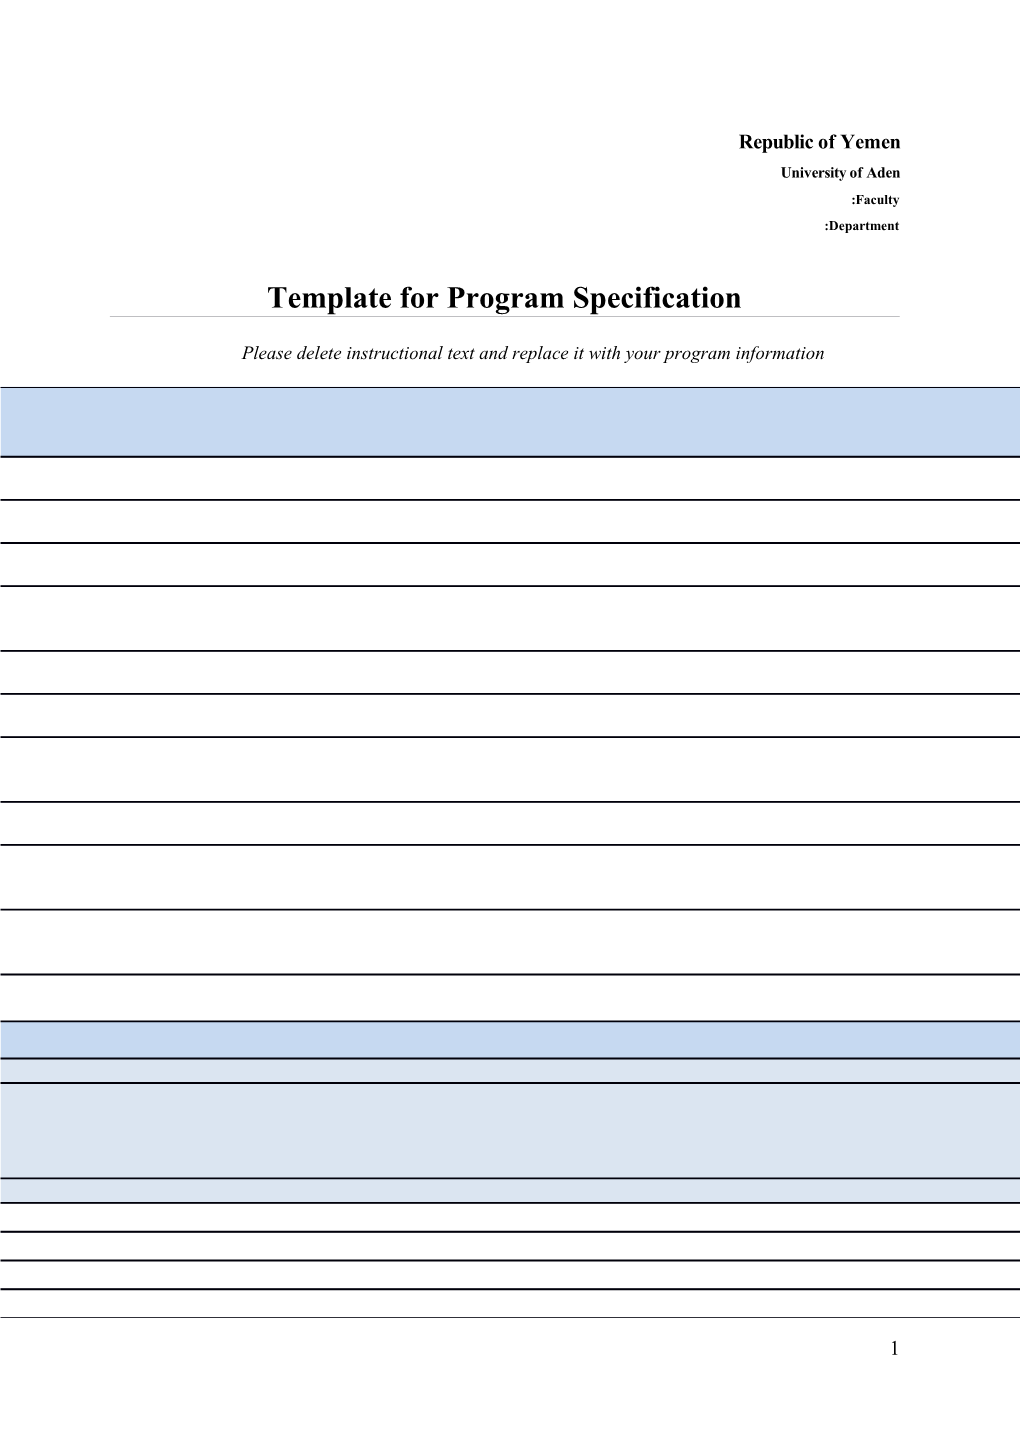 Template for Program Specification